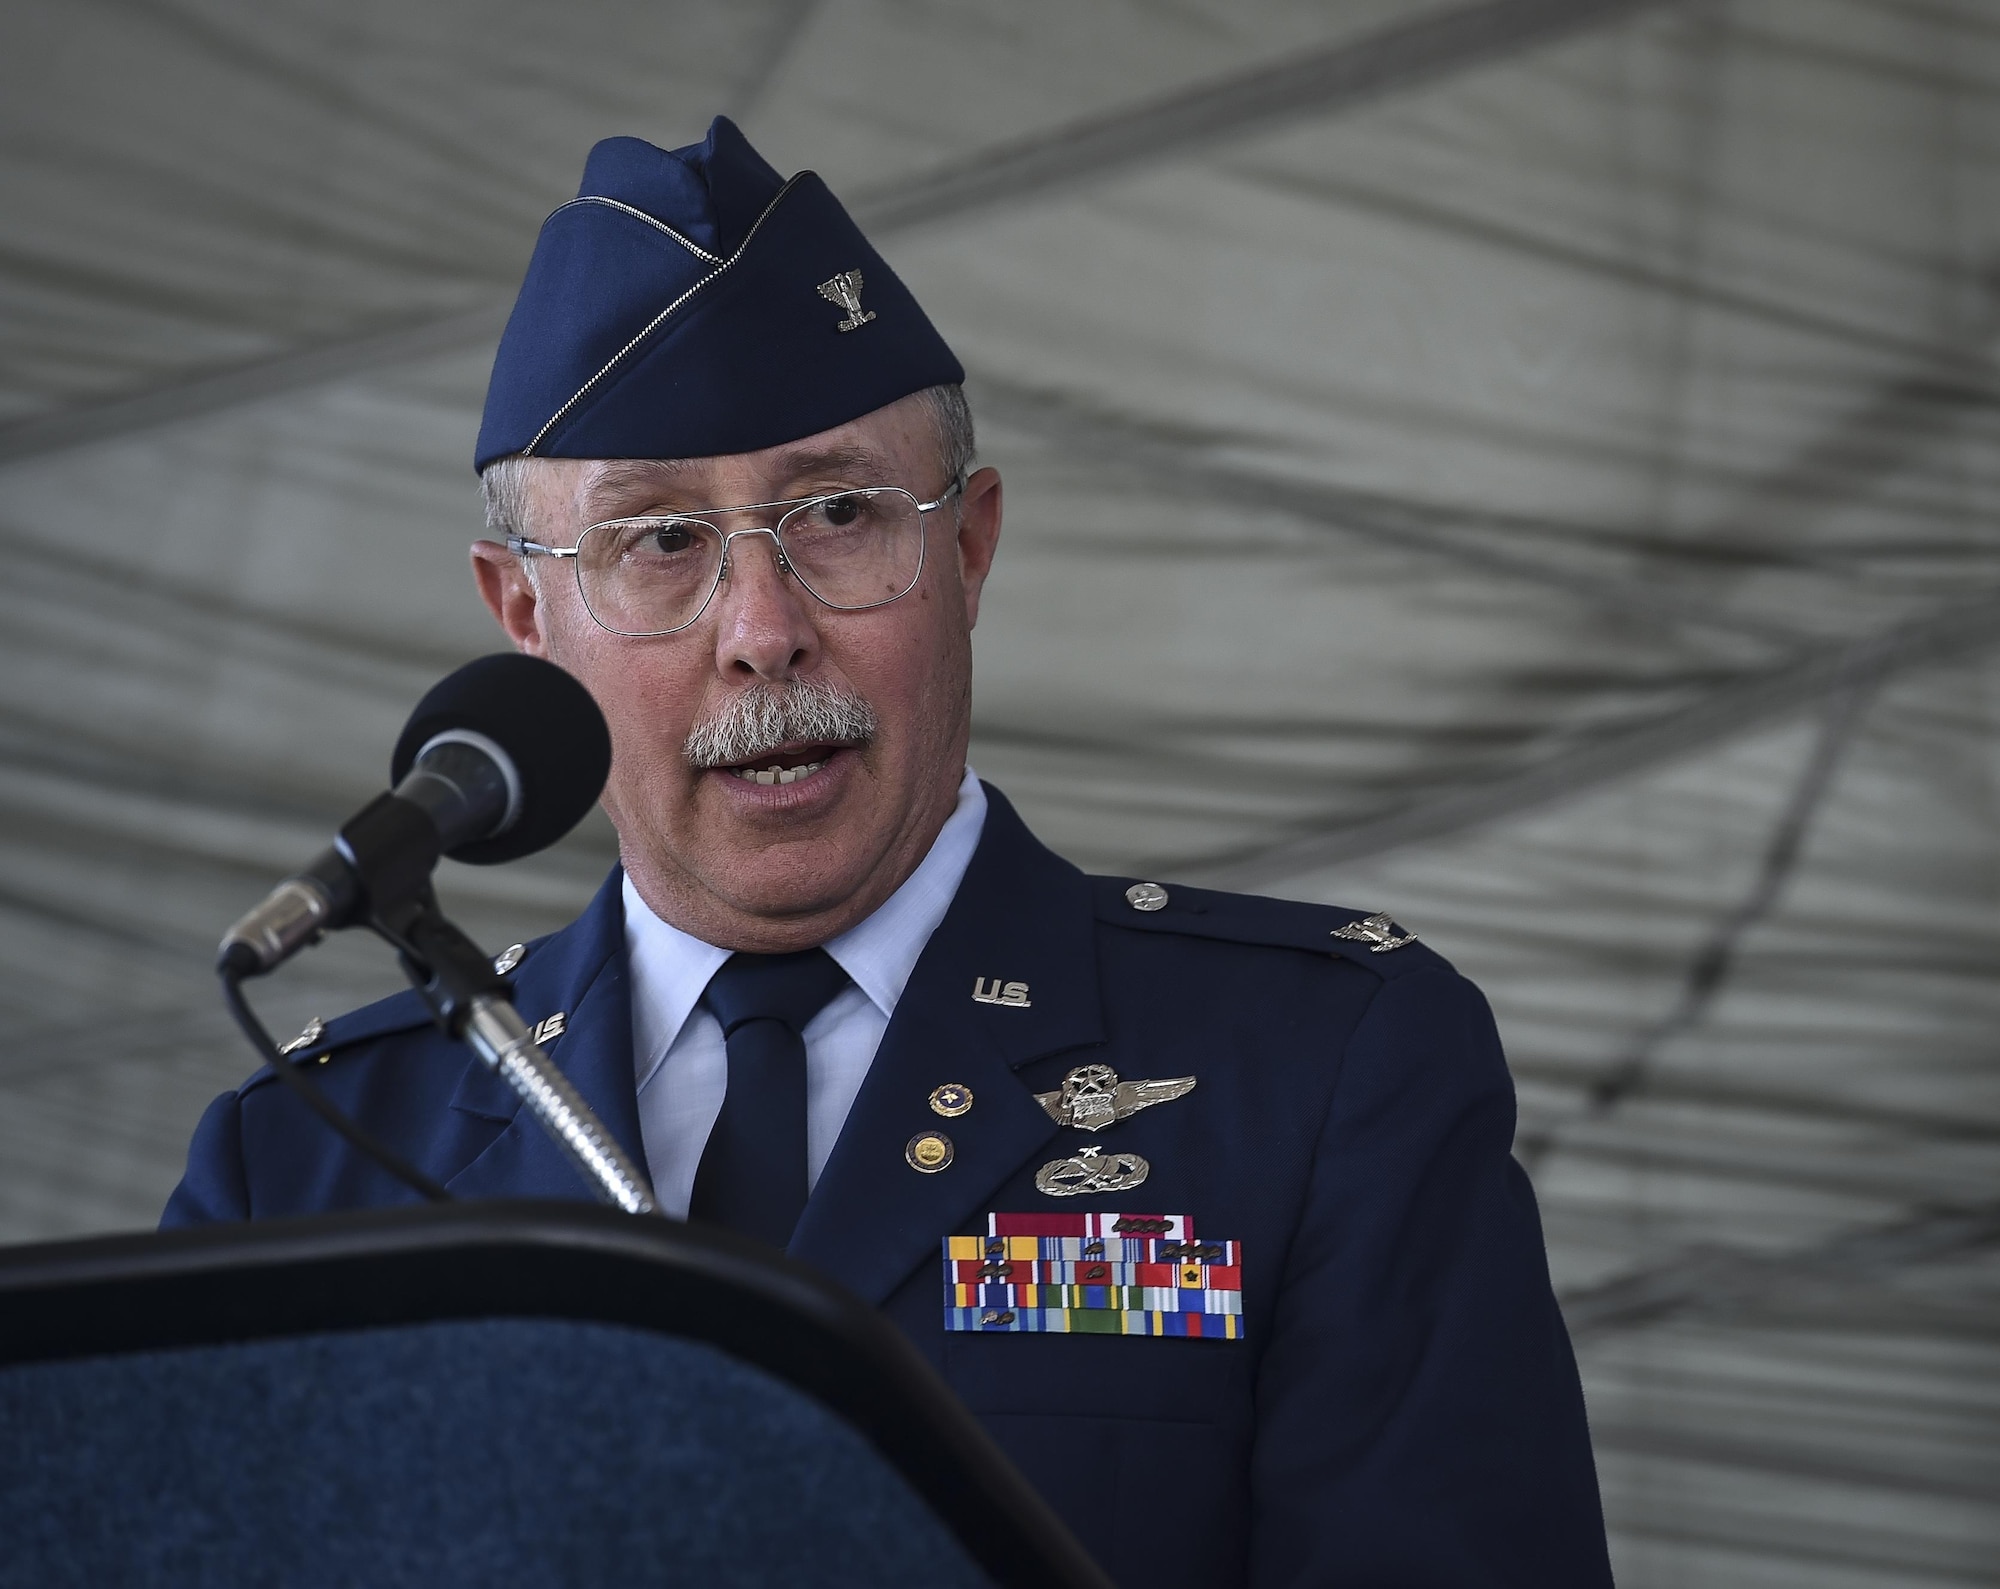 Retired Col. Mark Roland, Capt. Matthew Roland's father, speaks during Matthew's posthumous Silver Star medal presentation at Hurlburt Field, June 1, 2016.The family of Capt. Matthew D. Roland, a Special Tactics officer killed in action, was presented his posthumous Silver Star medal by Lt. Gen. Brad Heithold, commander of Air Force Special Operations Command. Matthew D. Roland gave his last full measure to protect teammates during an ambush on his convoy at an Afghan-led security checkpoint near Camp Antonik, Afghanistan, Aug. 26, 2015. The Silver Star medal is the nation's third-highest valorous combat decoration.  (U.S. Air Force photo by Senior Airman Ryan Conroy/Released)